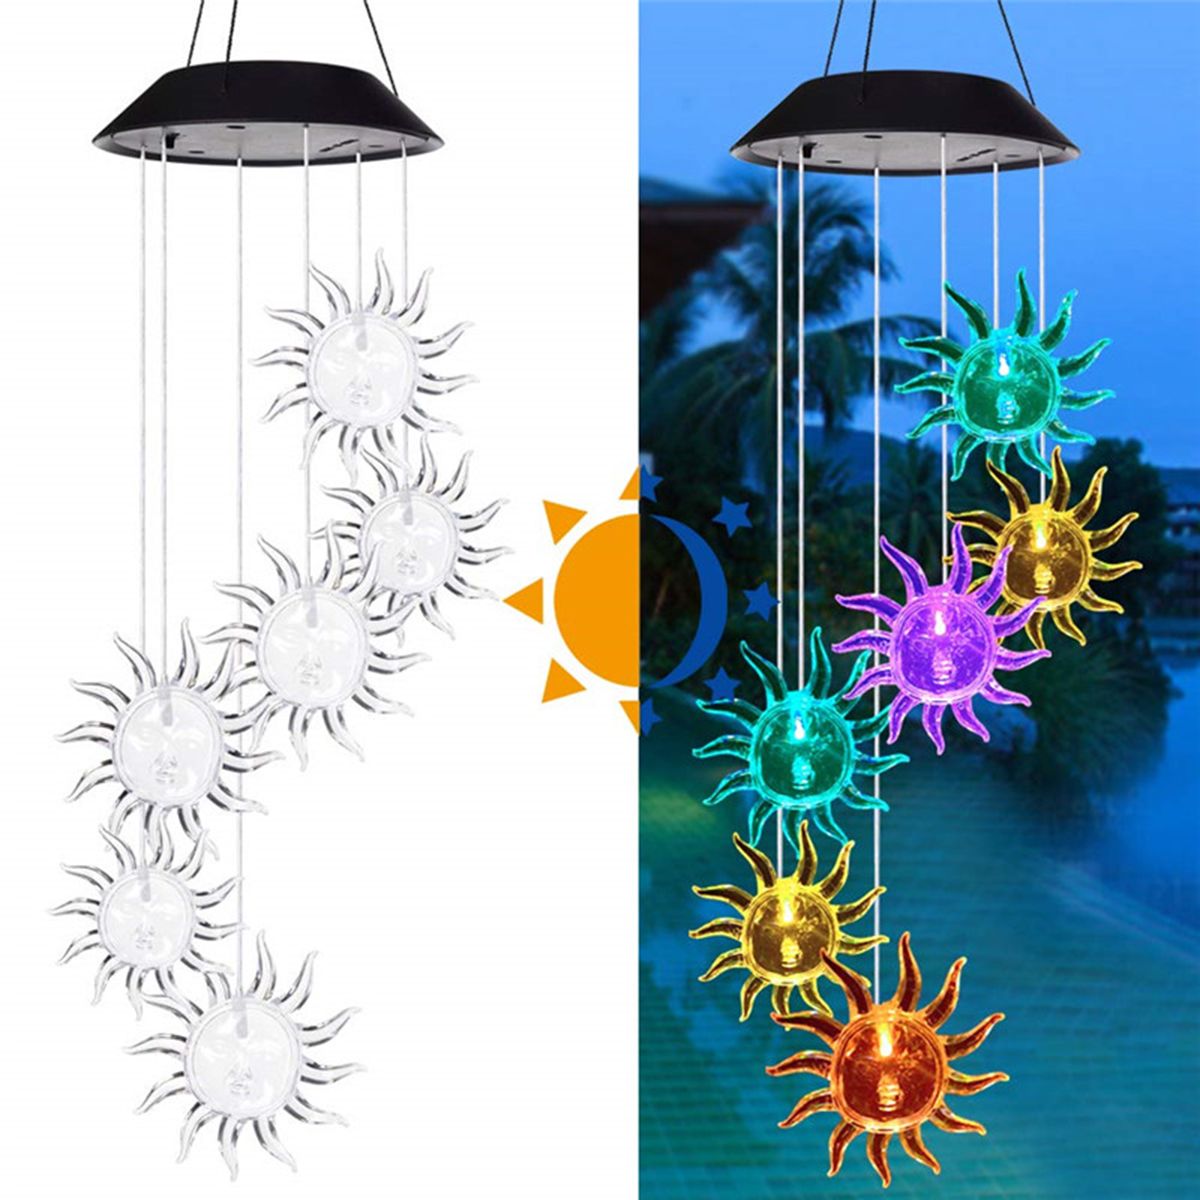 Solar-Powered-Hanging-Wind-Chimes-Light-Outdoor-Color-Changing-LED-Lamp-Sun-Garden-Yard-Decoration-1719851